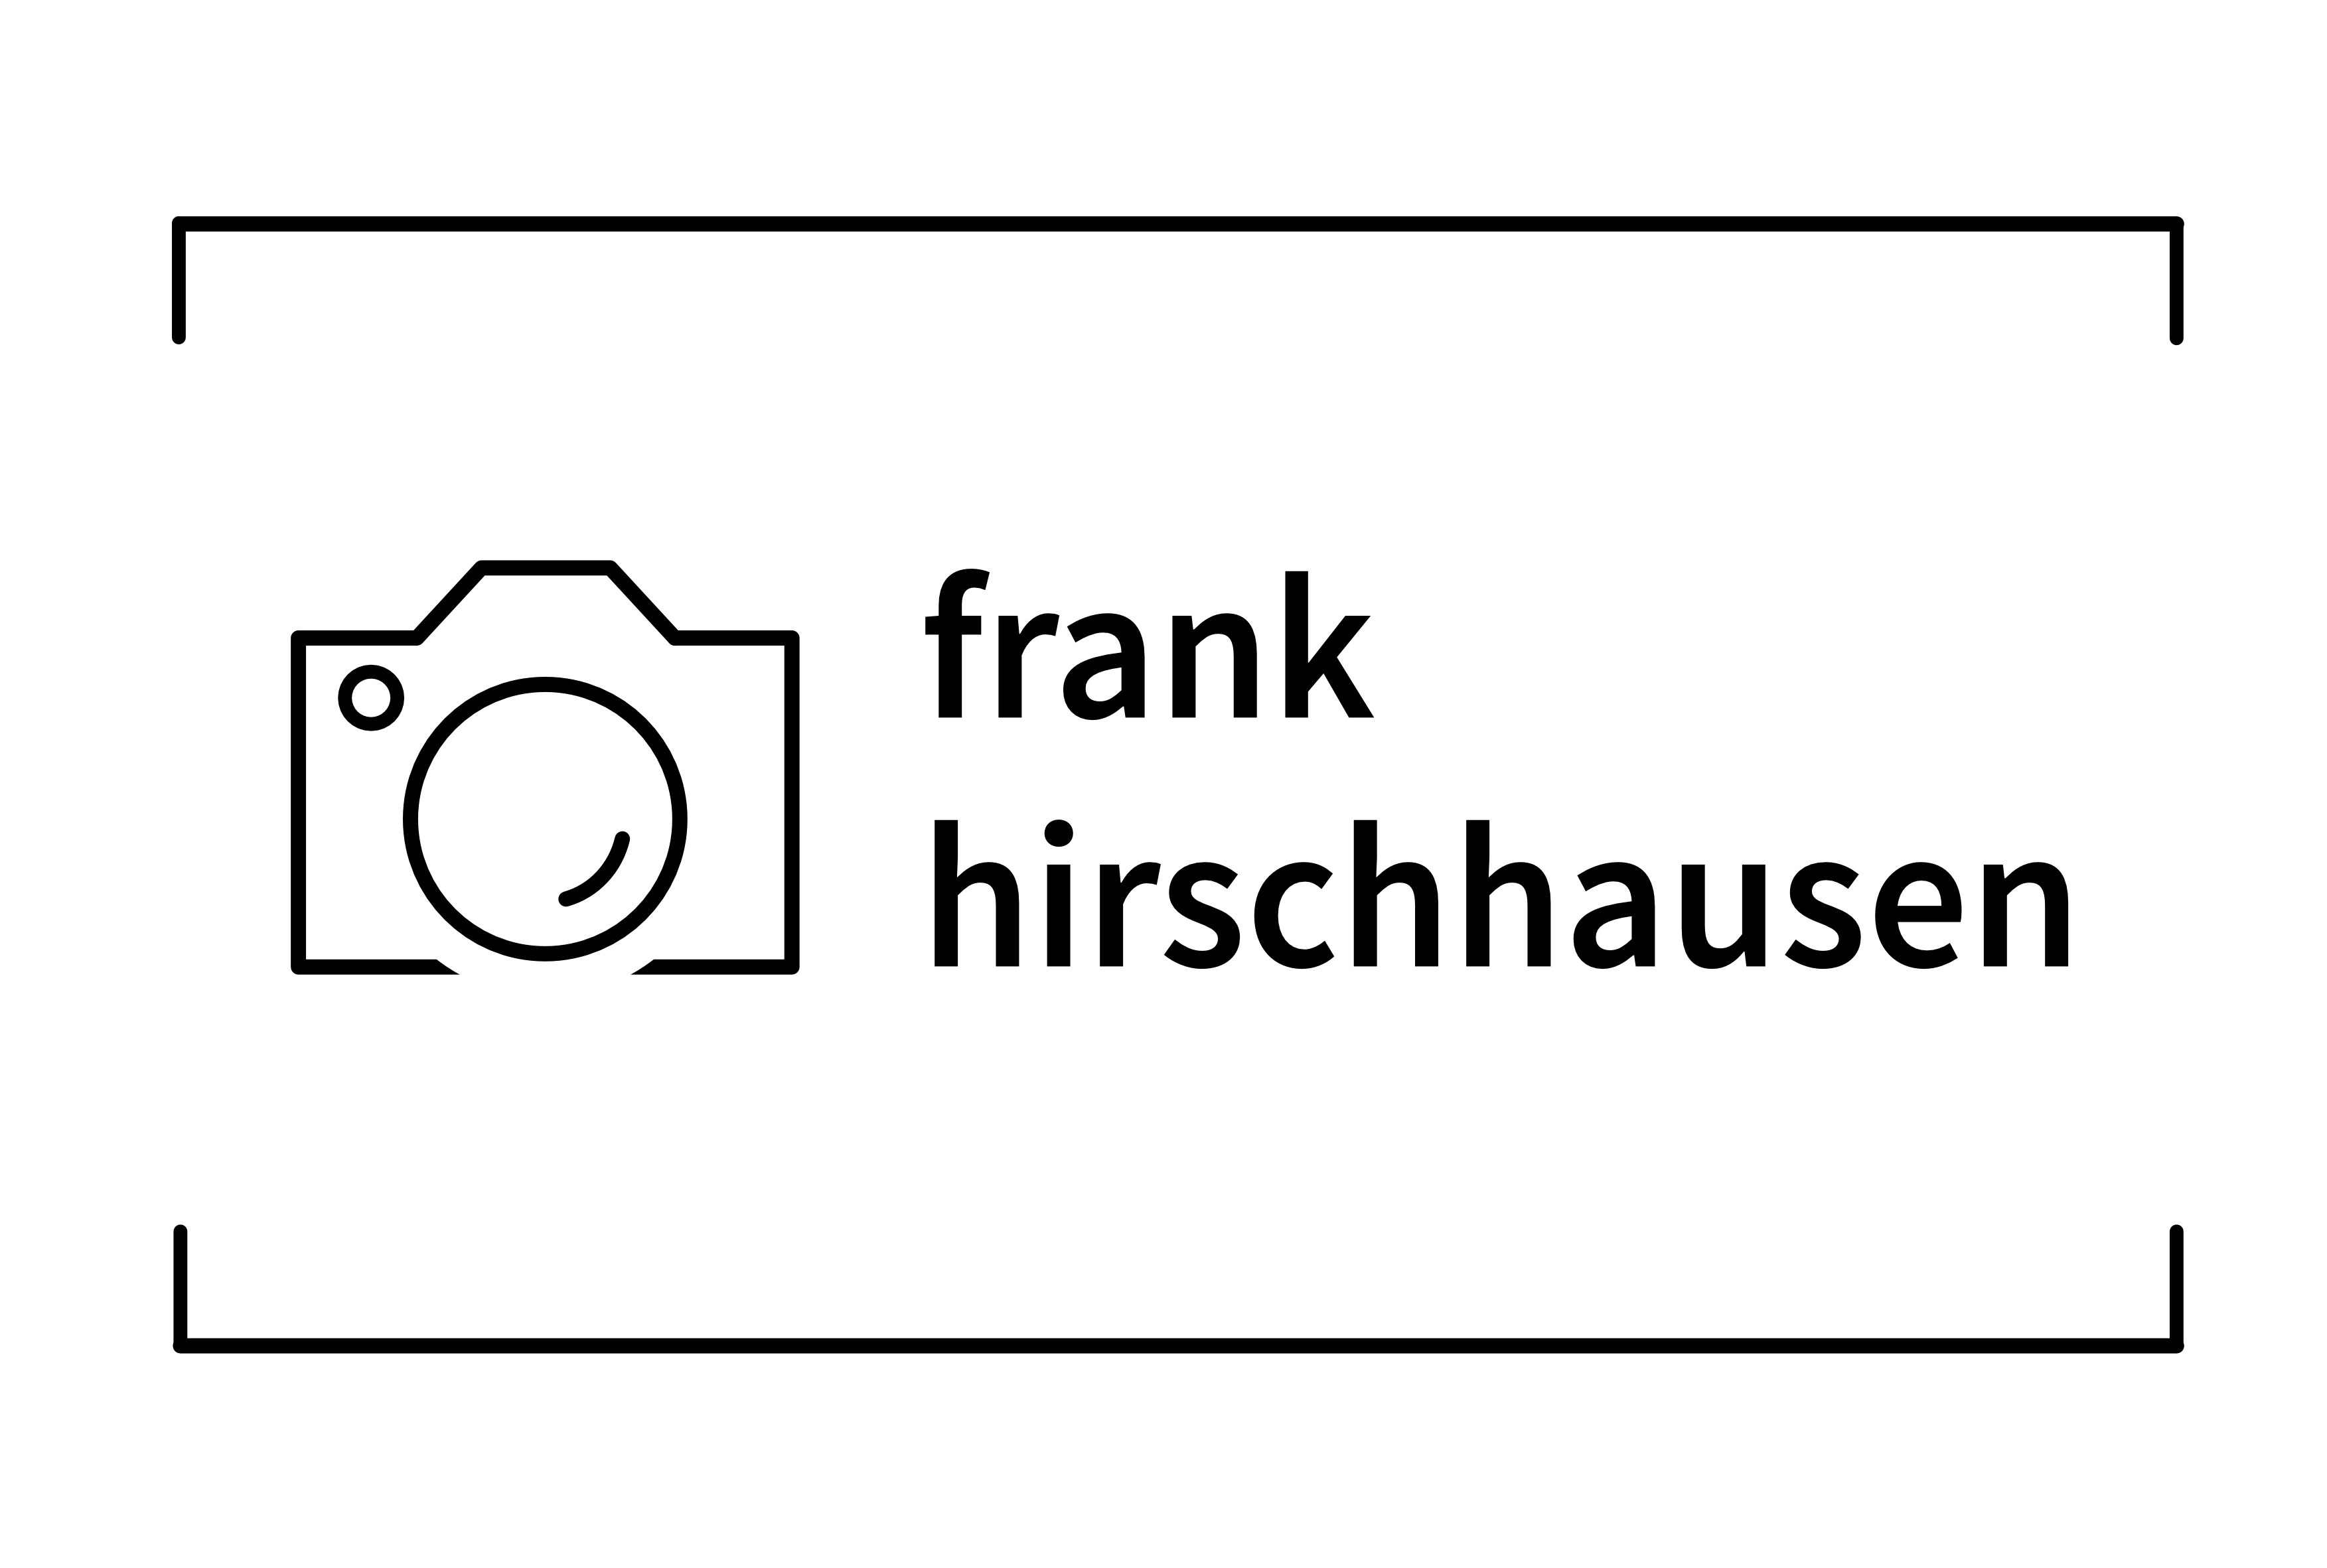 my name is frank hirschhausen and i am a photographer